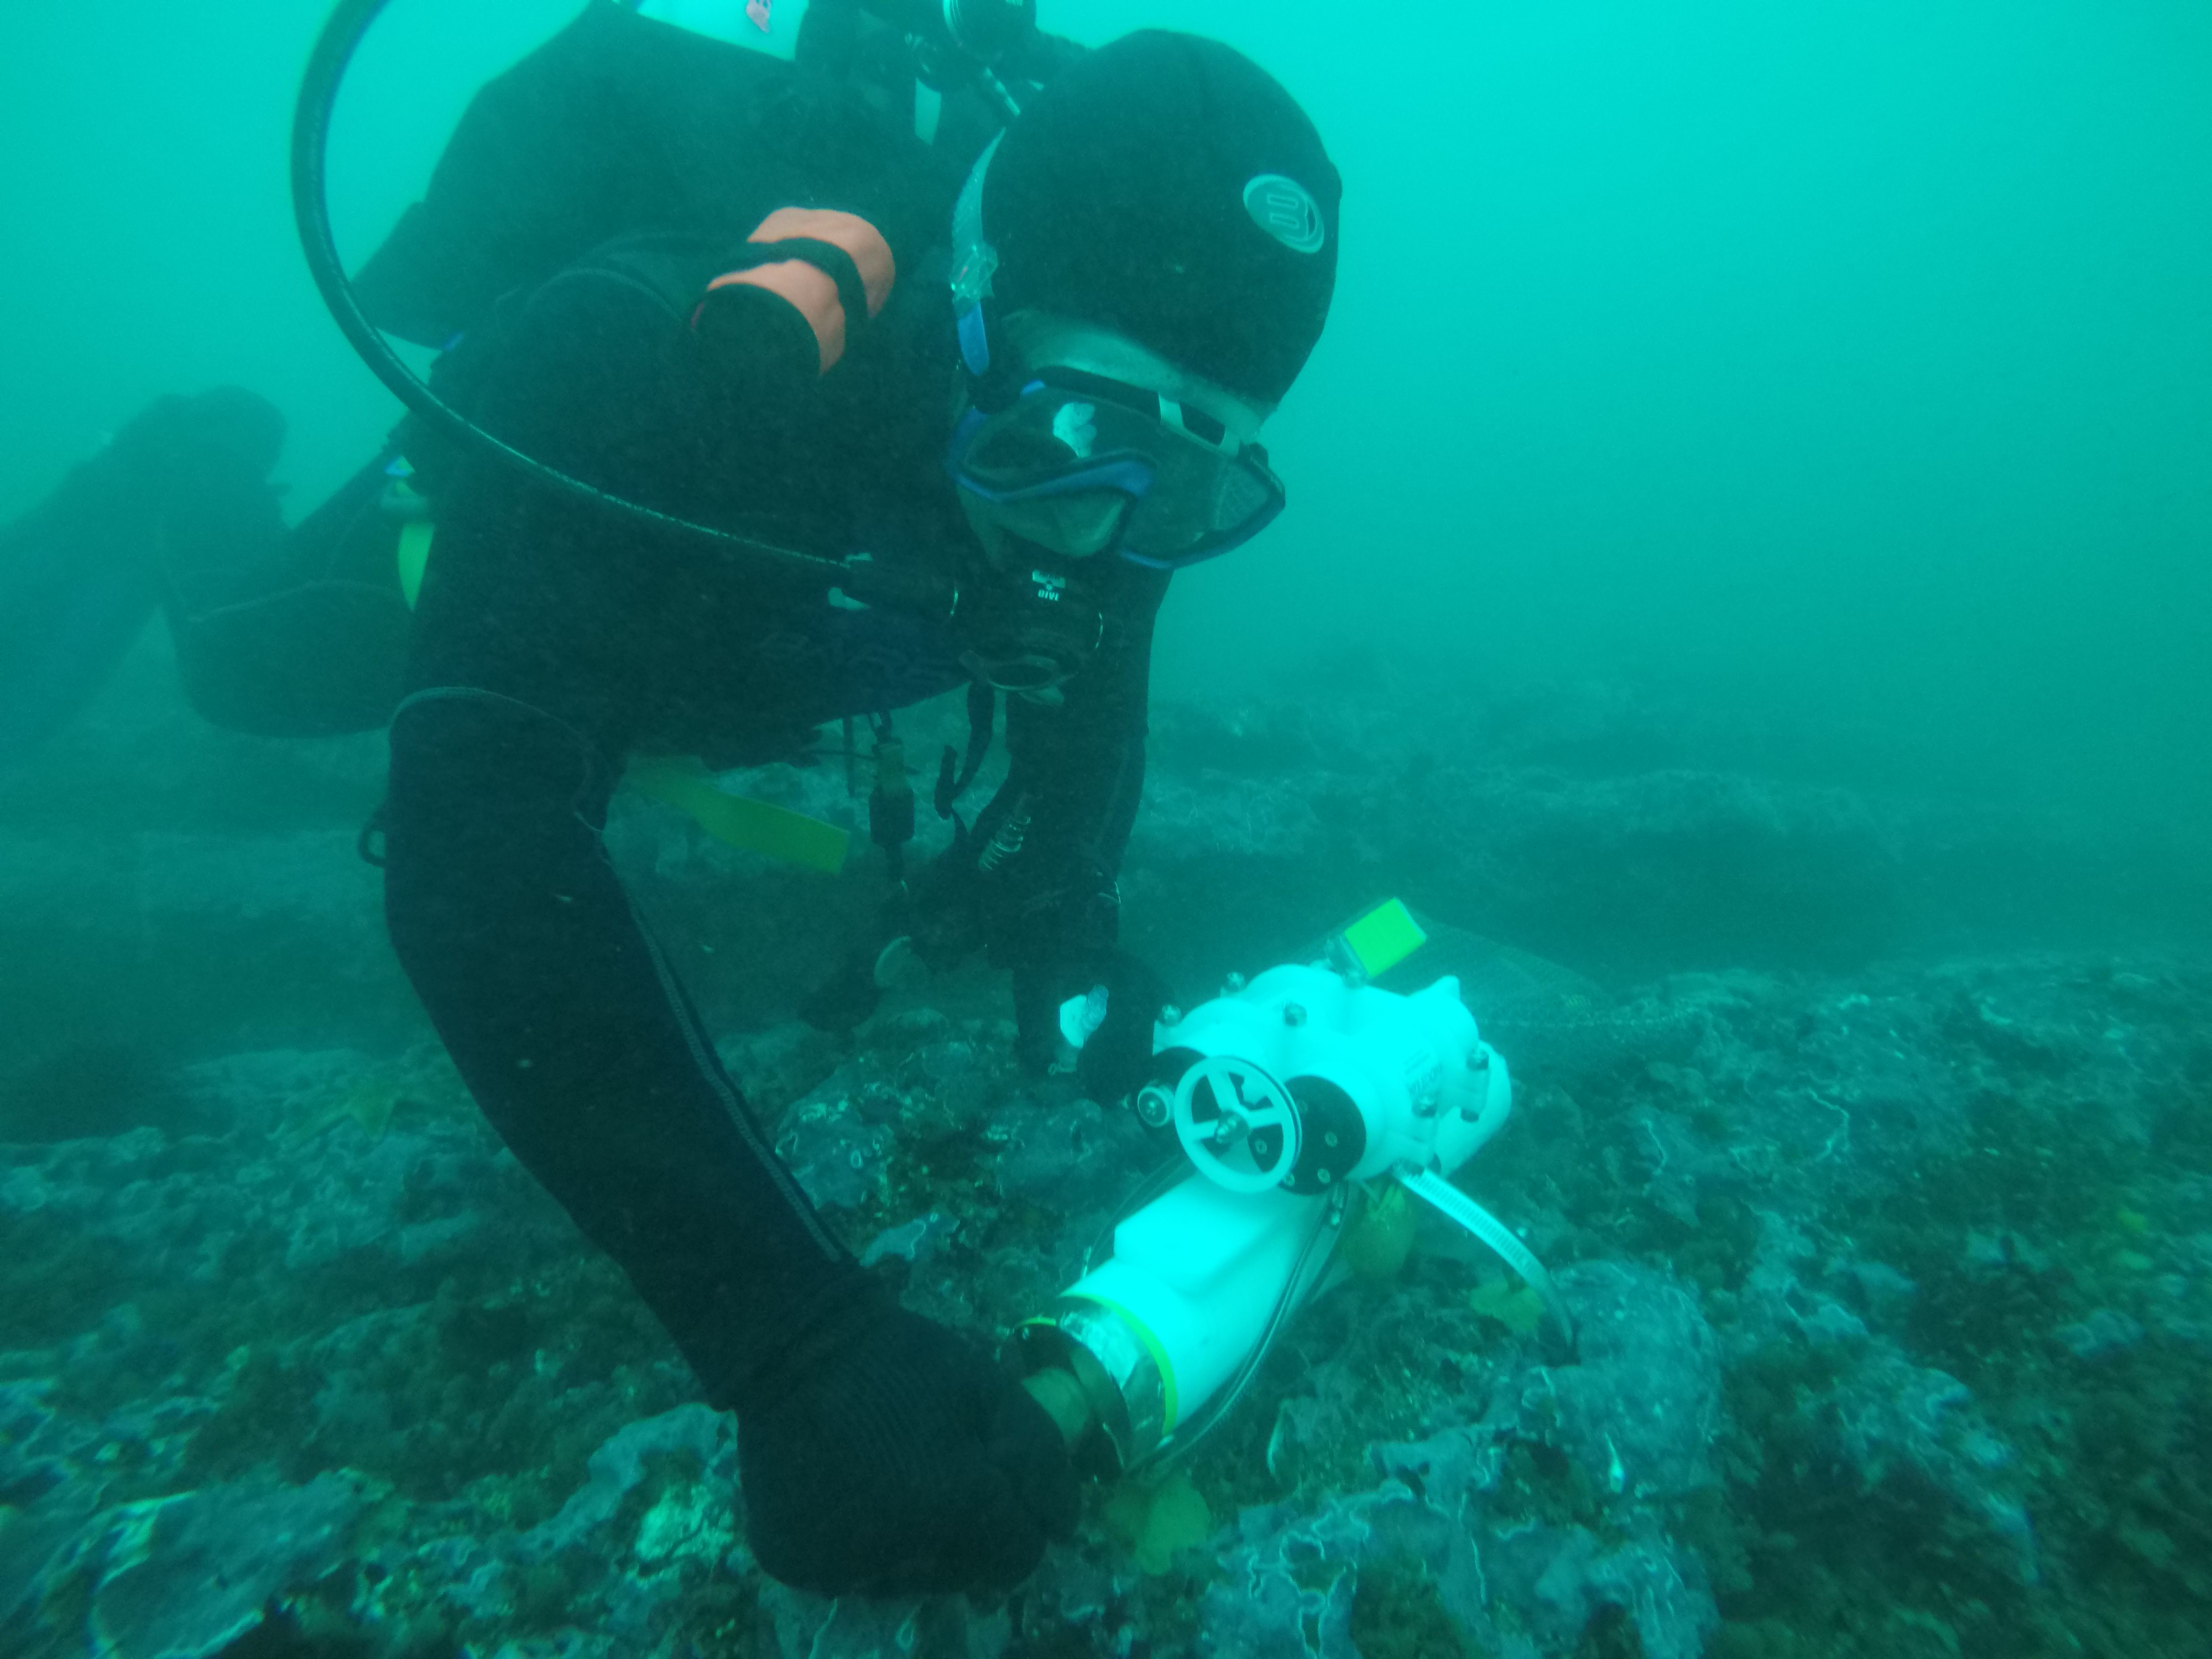 Monitoring Climate Change in the Kelp Forest With the Help of Citizen Scientists